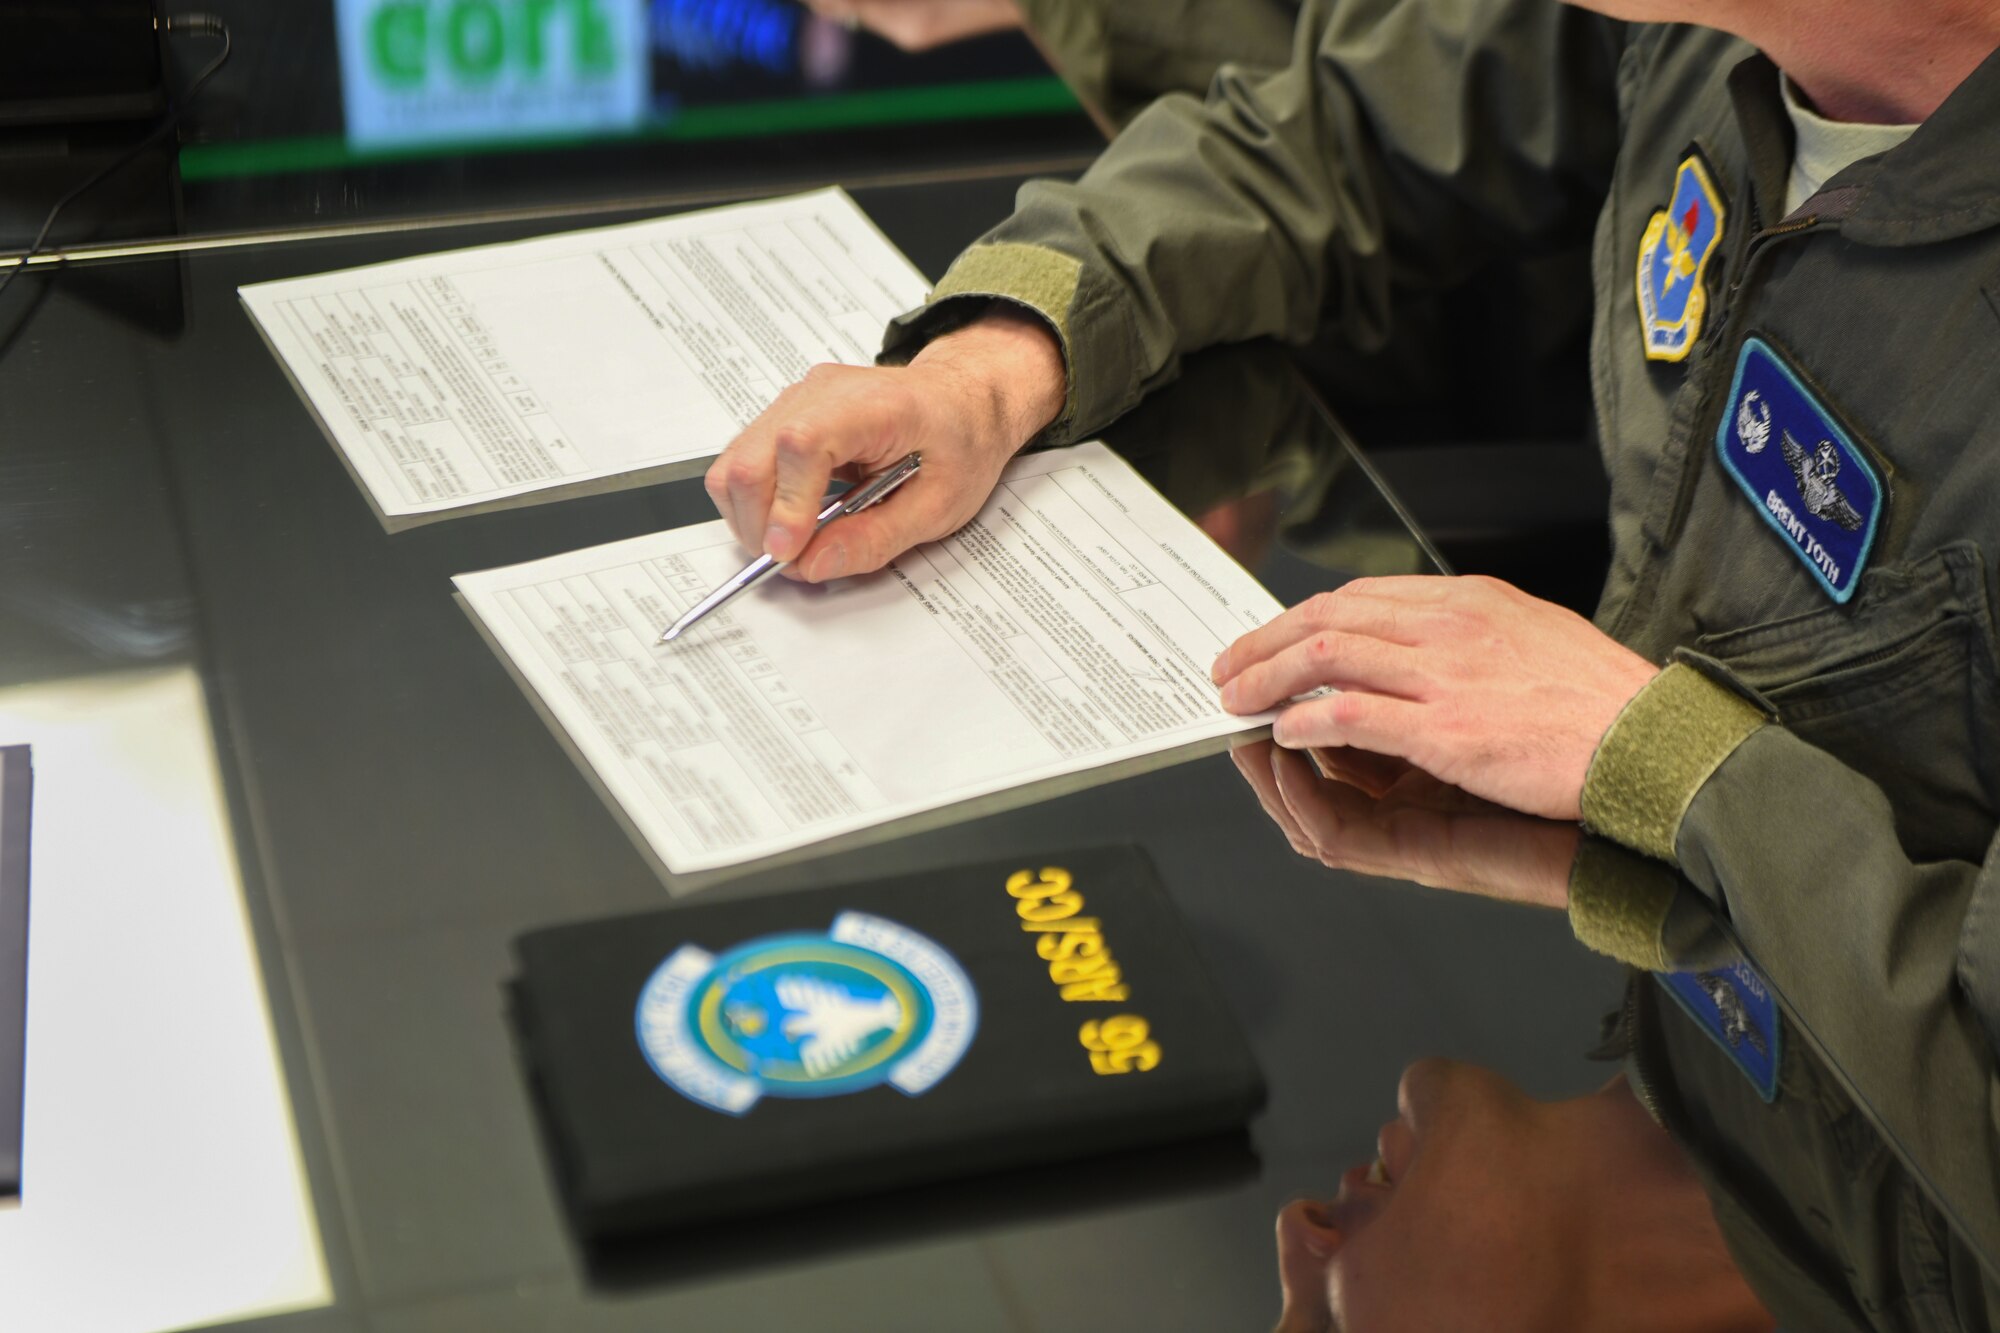 U.S. Air Force Lt. Col. Brent Toth, 56th Air Refueling Squadron commander, signs the first set of flight orders for the incoming KC-46A Pegasus, Feb. 4, 2019, at Altus Air Force Base, Okla. The flight orders are for the crew that will be flying the KC-46 from Washington State to Altus AFB. (U.S. Air Force photo by Airman 1st Class Jeremy Wentworth)